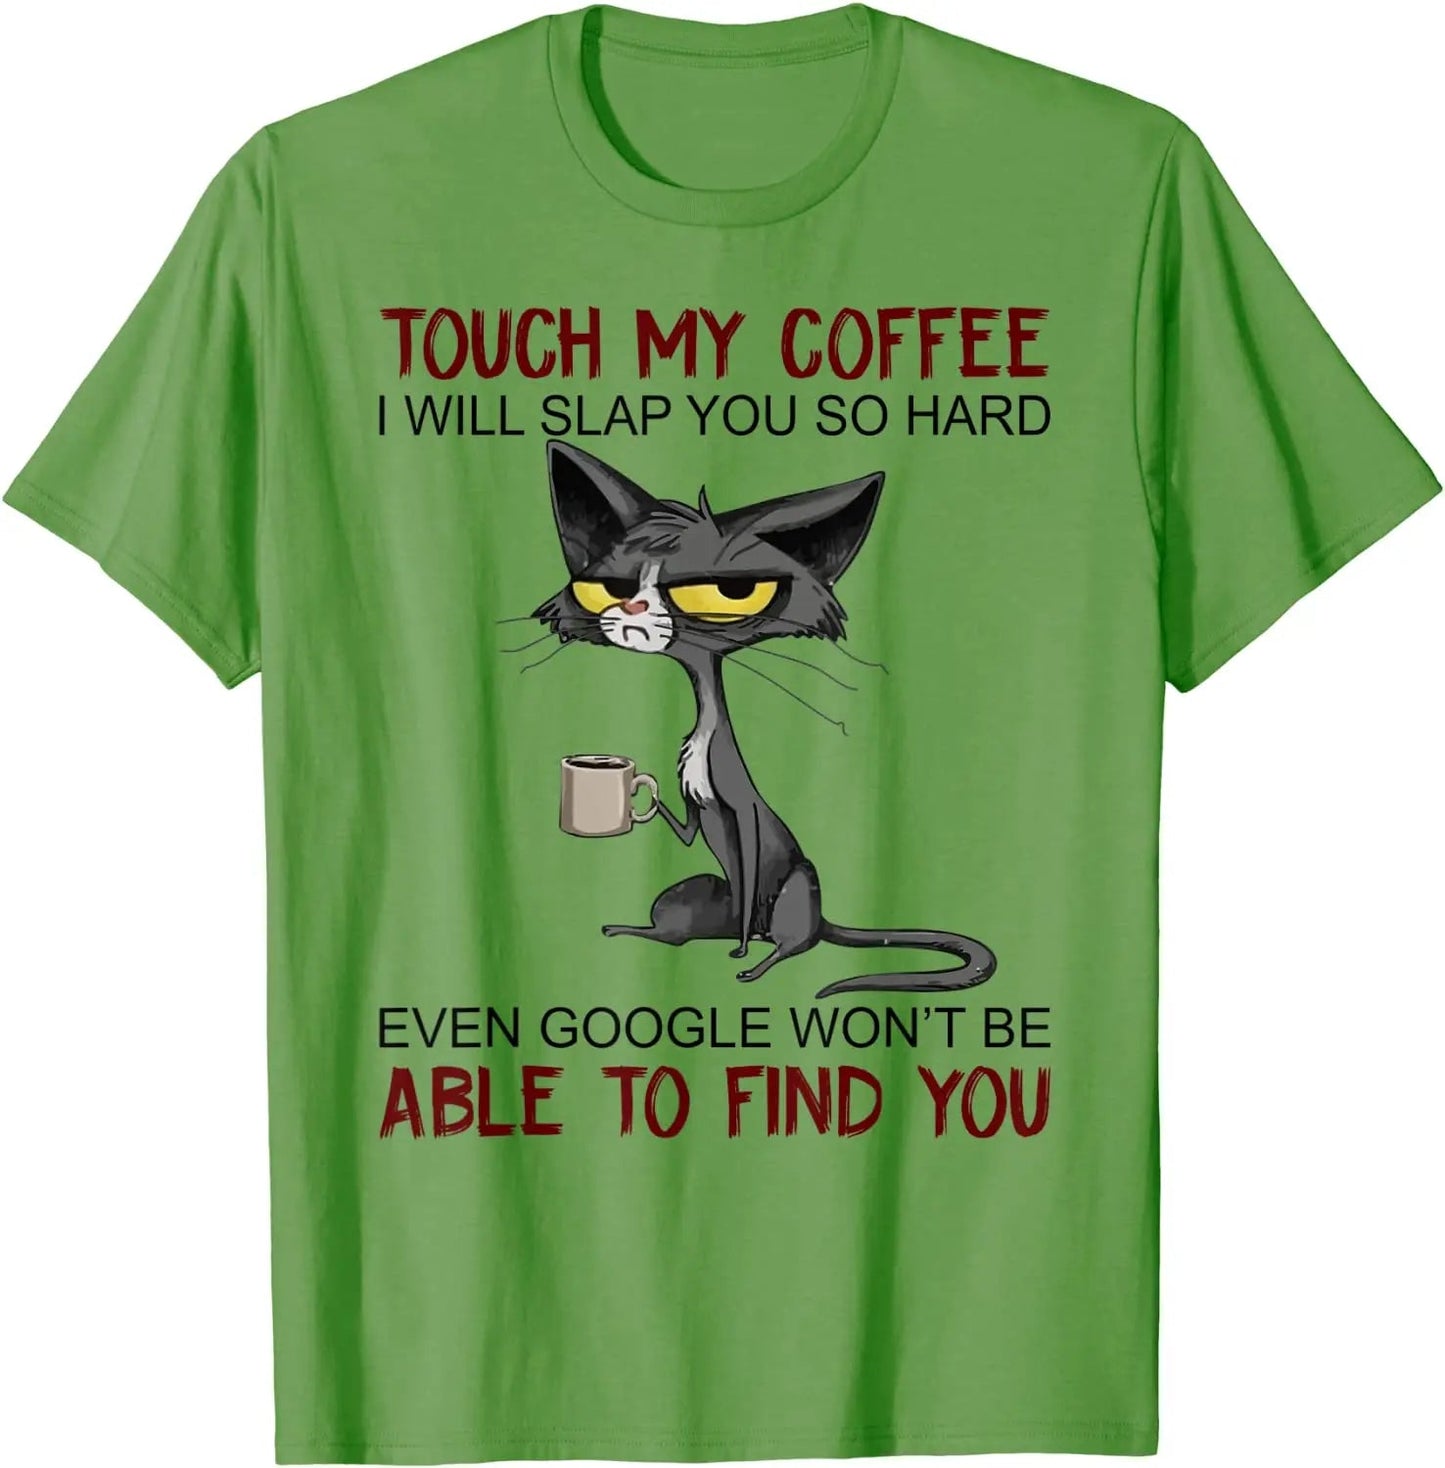 Funny Novelty T - Shirt Gift | "Touch My Coffee I Will Slap You So Hard" - VarietyGifts